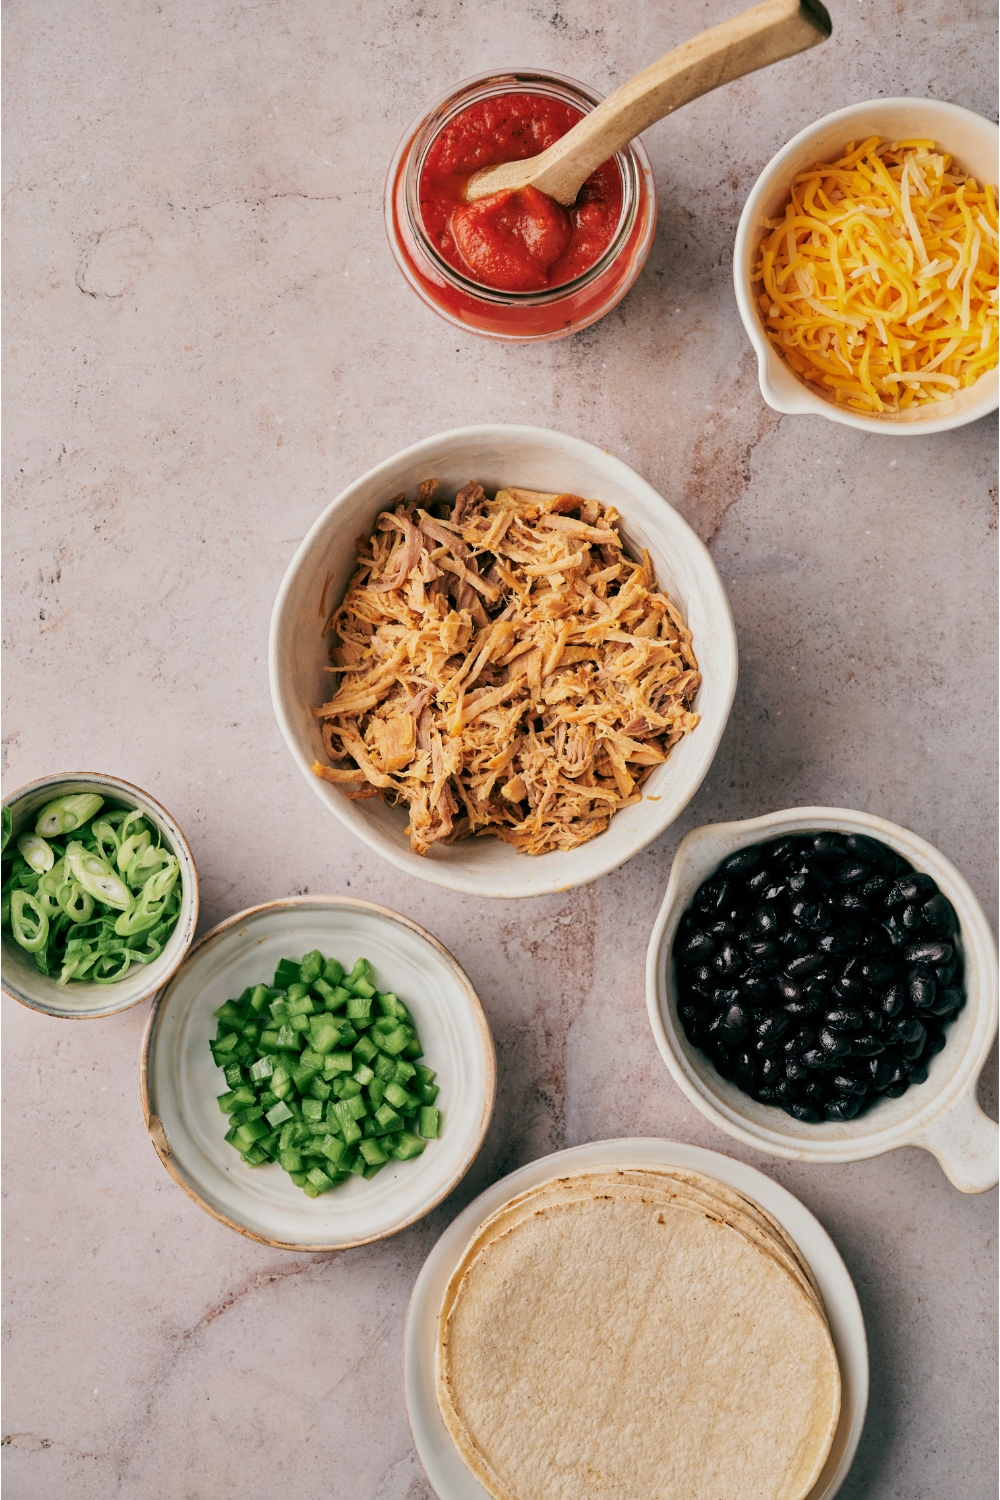 An assortment of ingredients including bowls of salsa, shredded cheese, pulled pork, black beans, diced bell pepper, green onion, and a plate of tortillas.